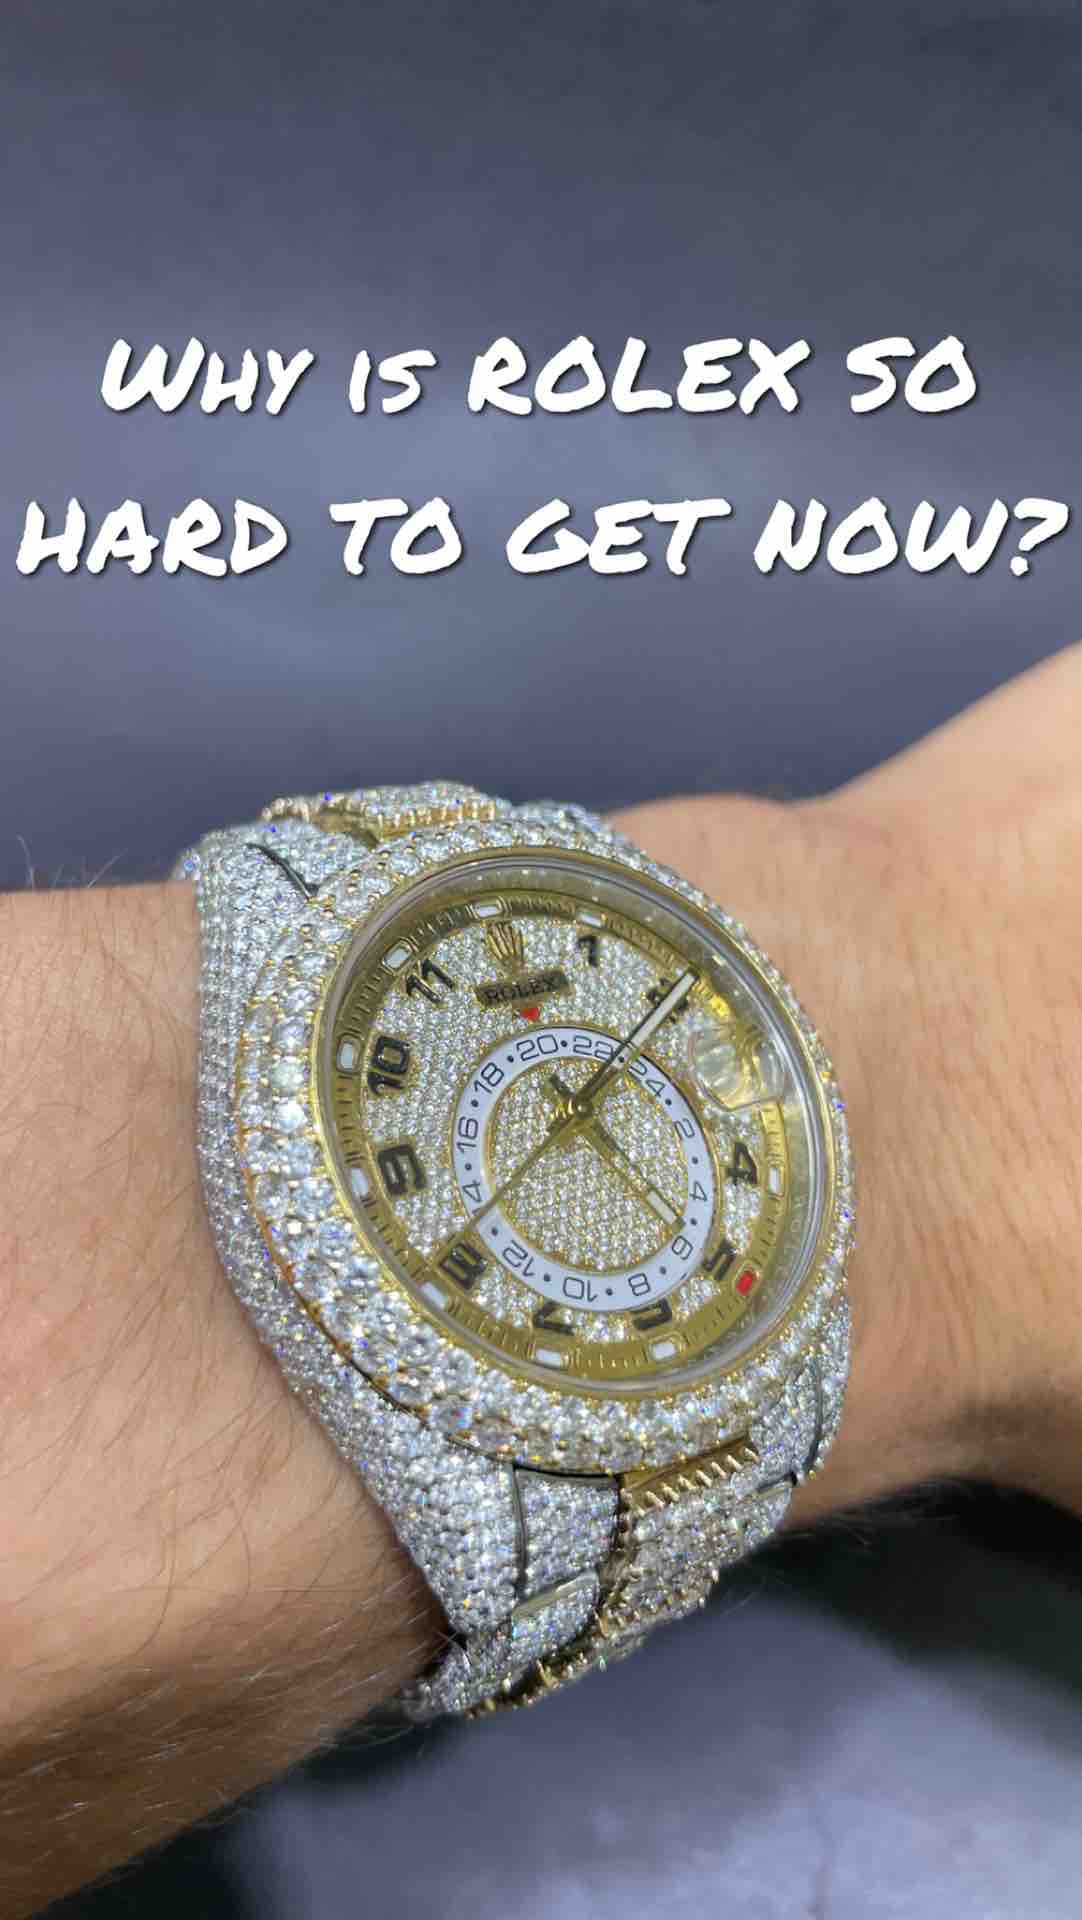 Why is Rolex so hard to get now?